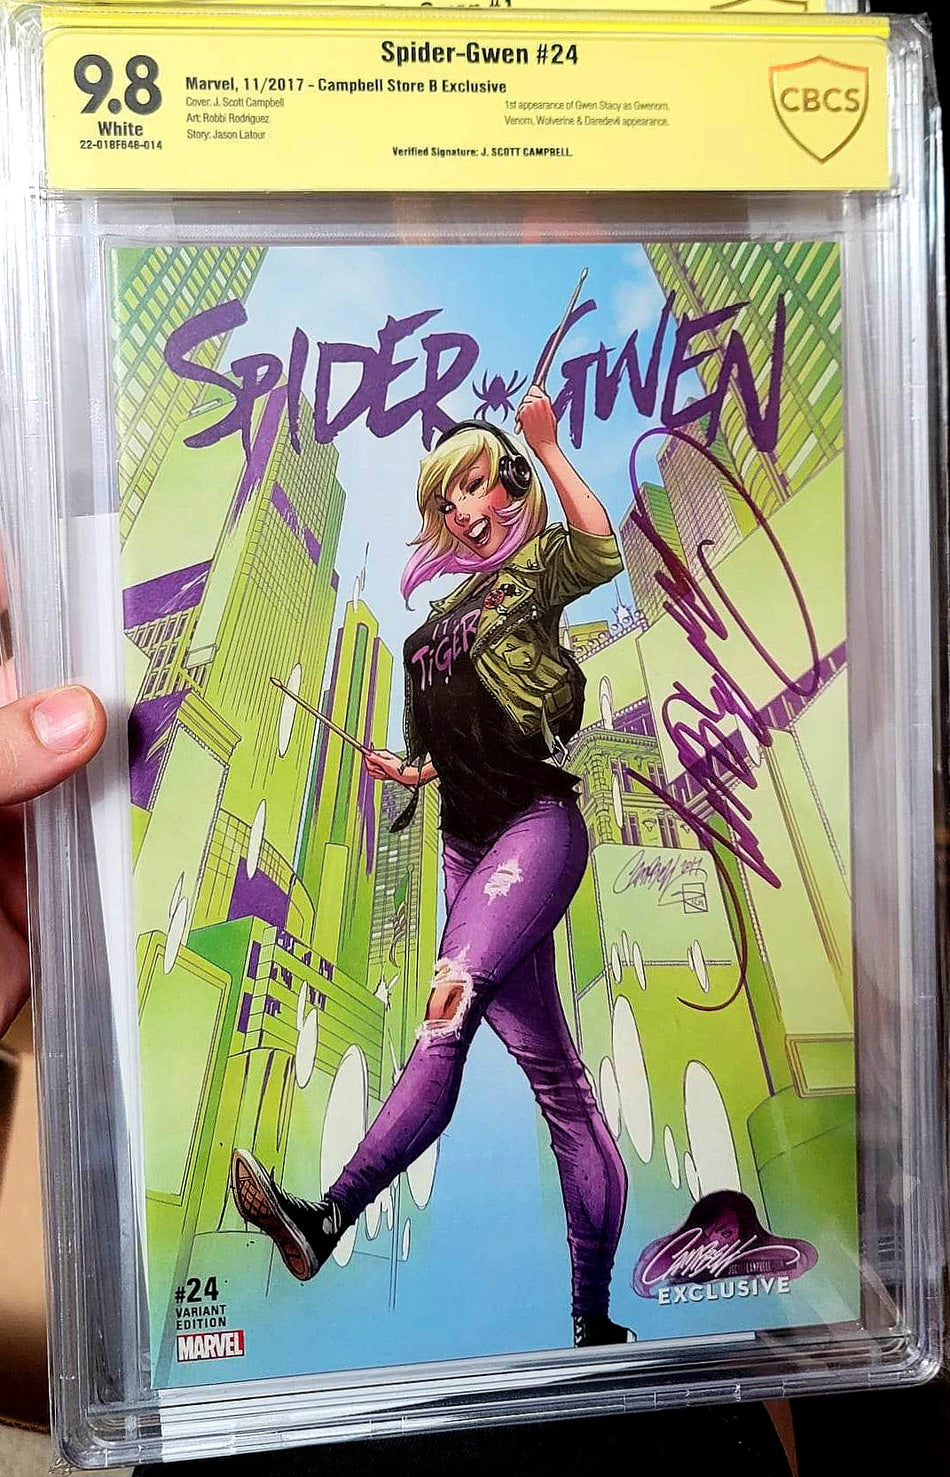 Spider-Gwen #24 B (2017) JSC J Scott Campbell Exclusive CBCS 9.8 VERIFIED SIGNATURE by Campbell w/ COA (1st Appearance of Gwen Stacy as Gwenom)